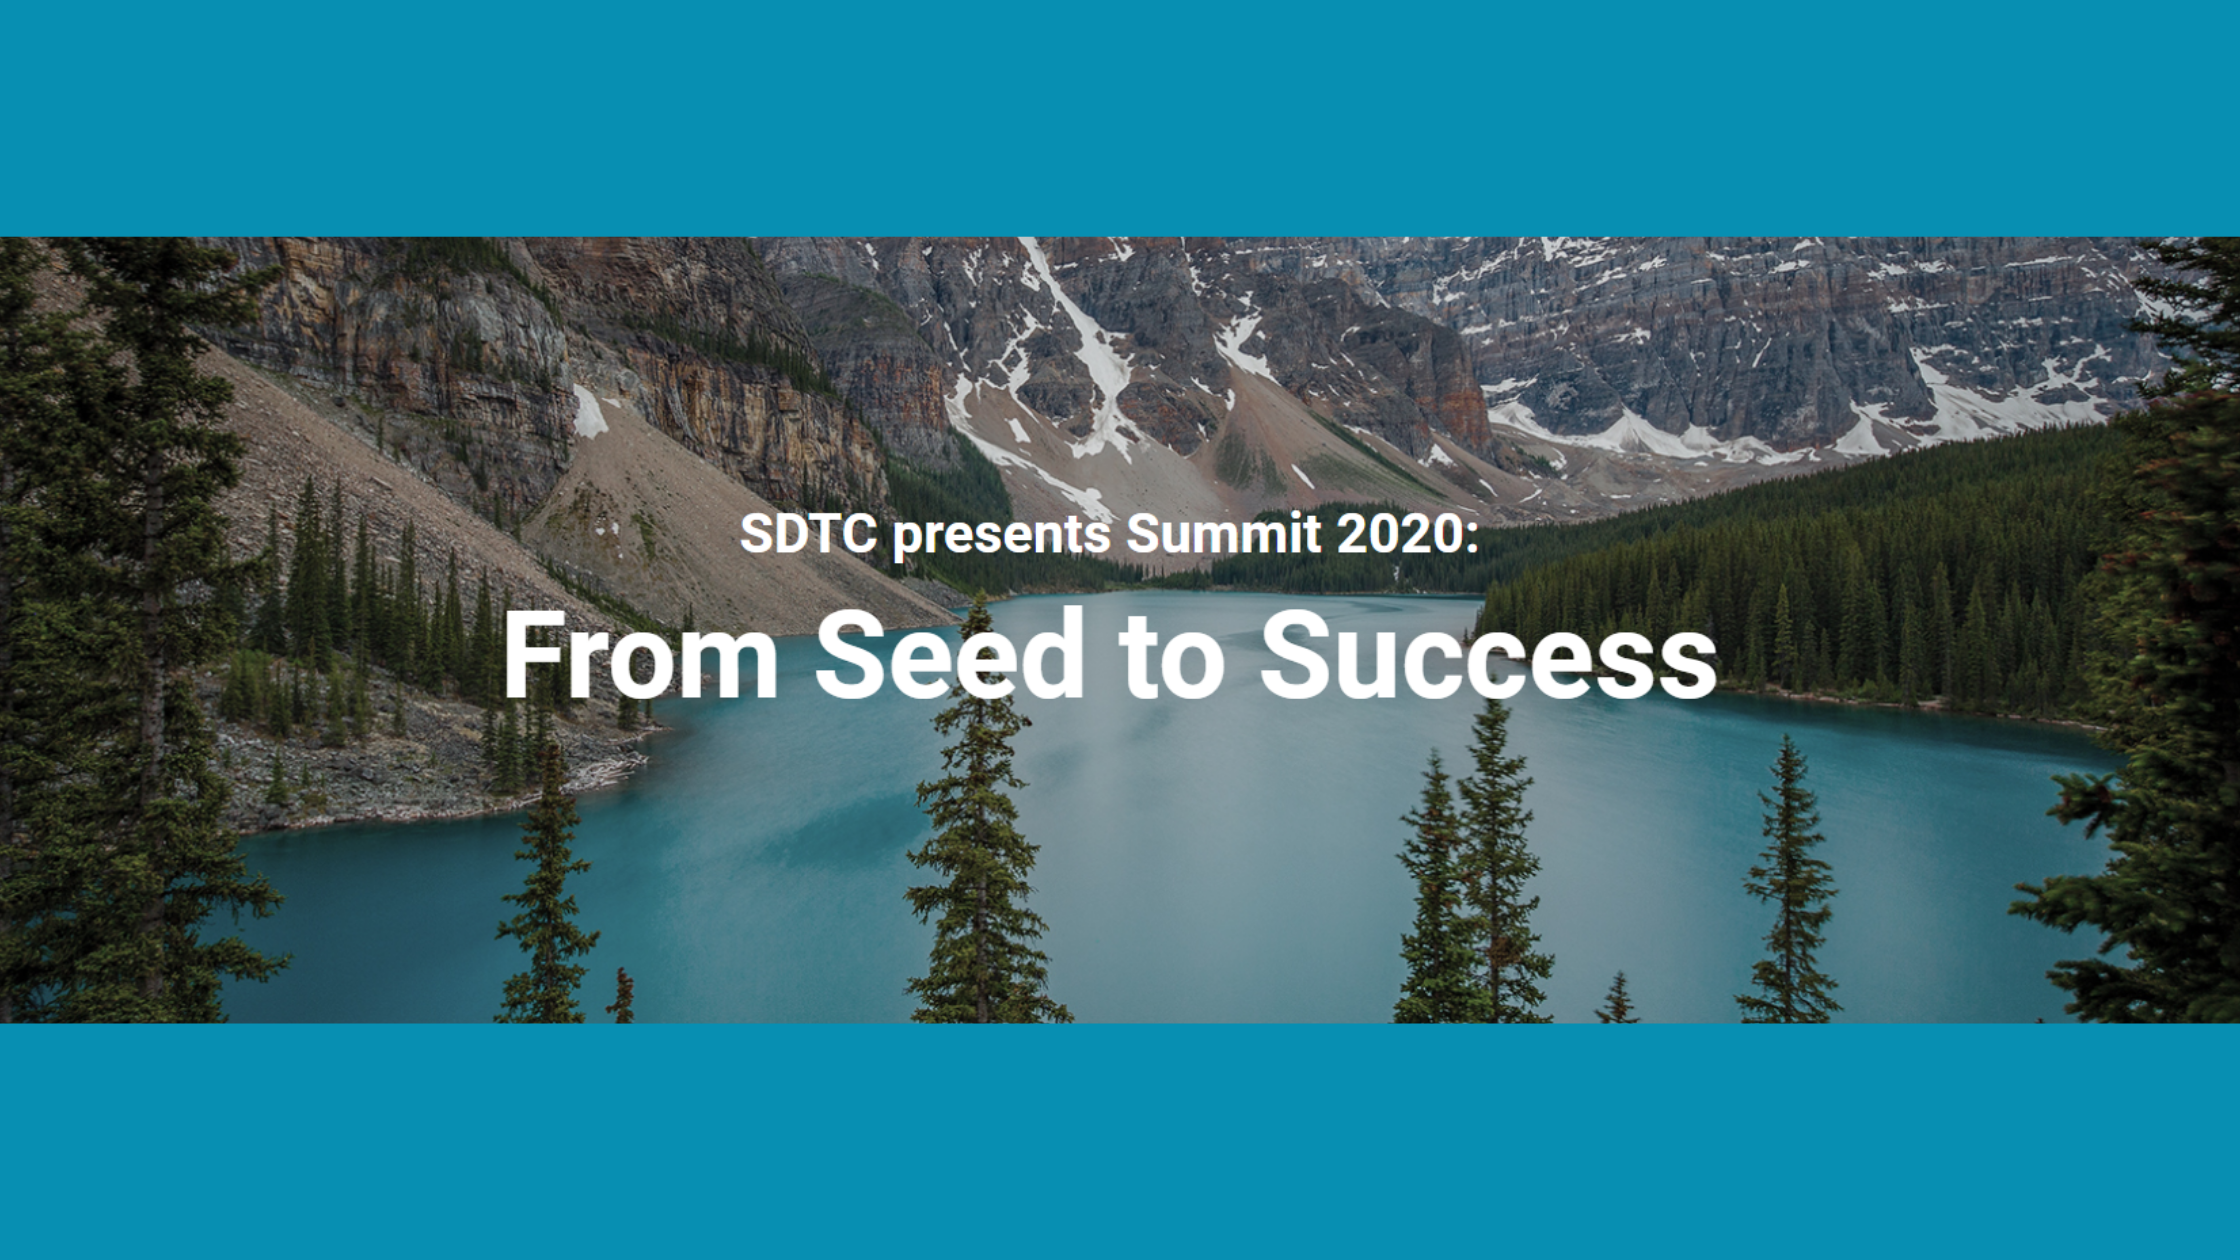 SDTC presents Summit 2020: From Seed to Success